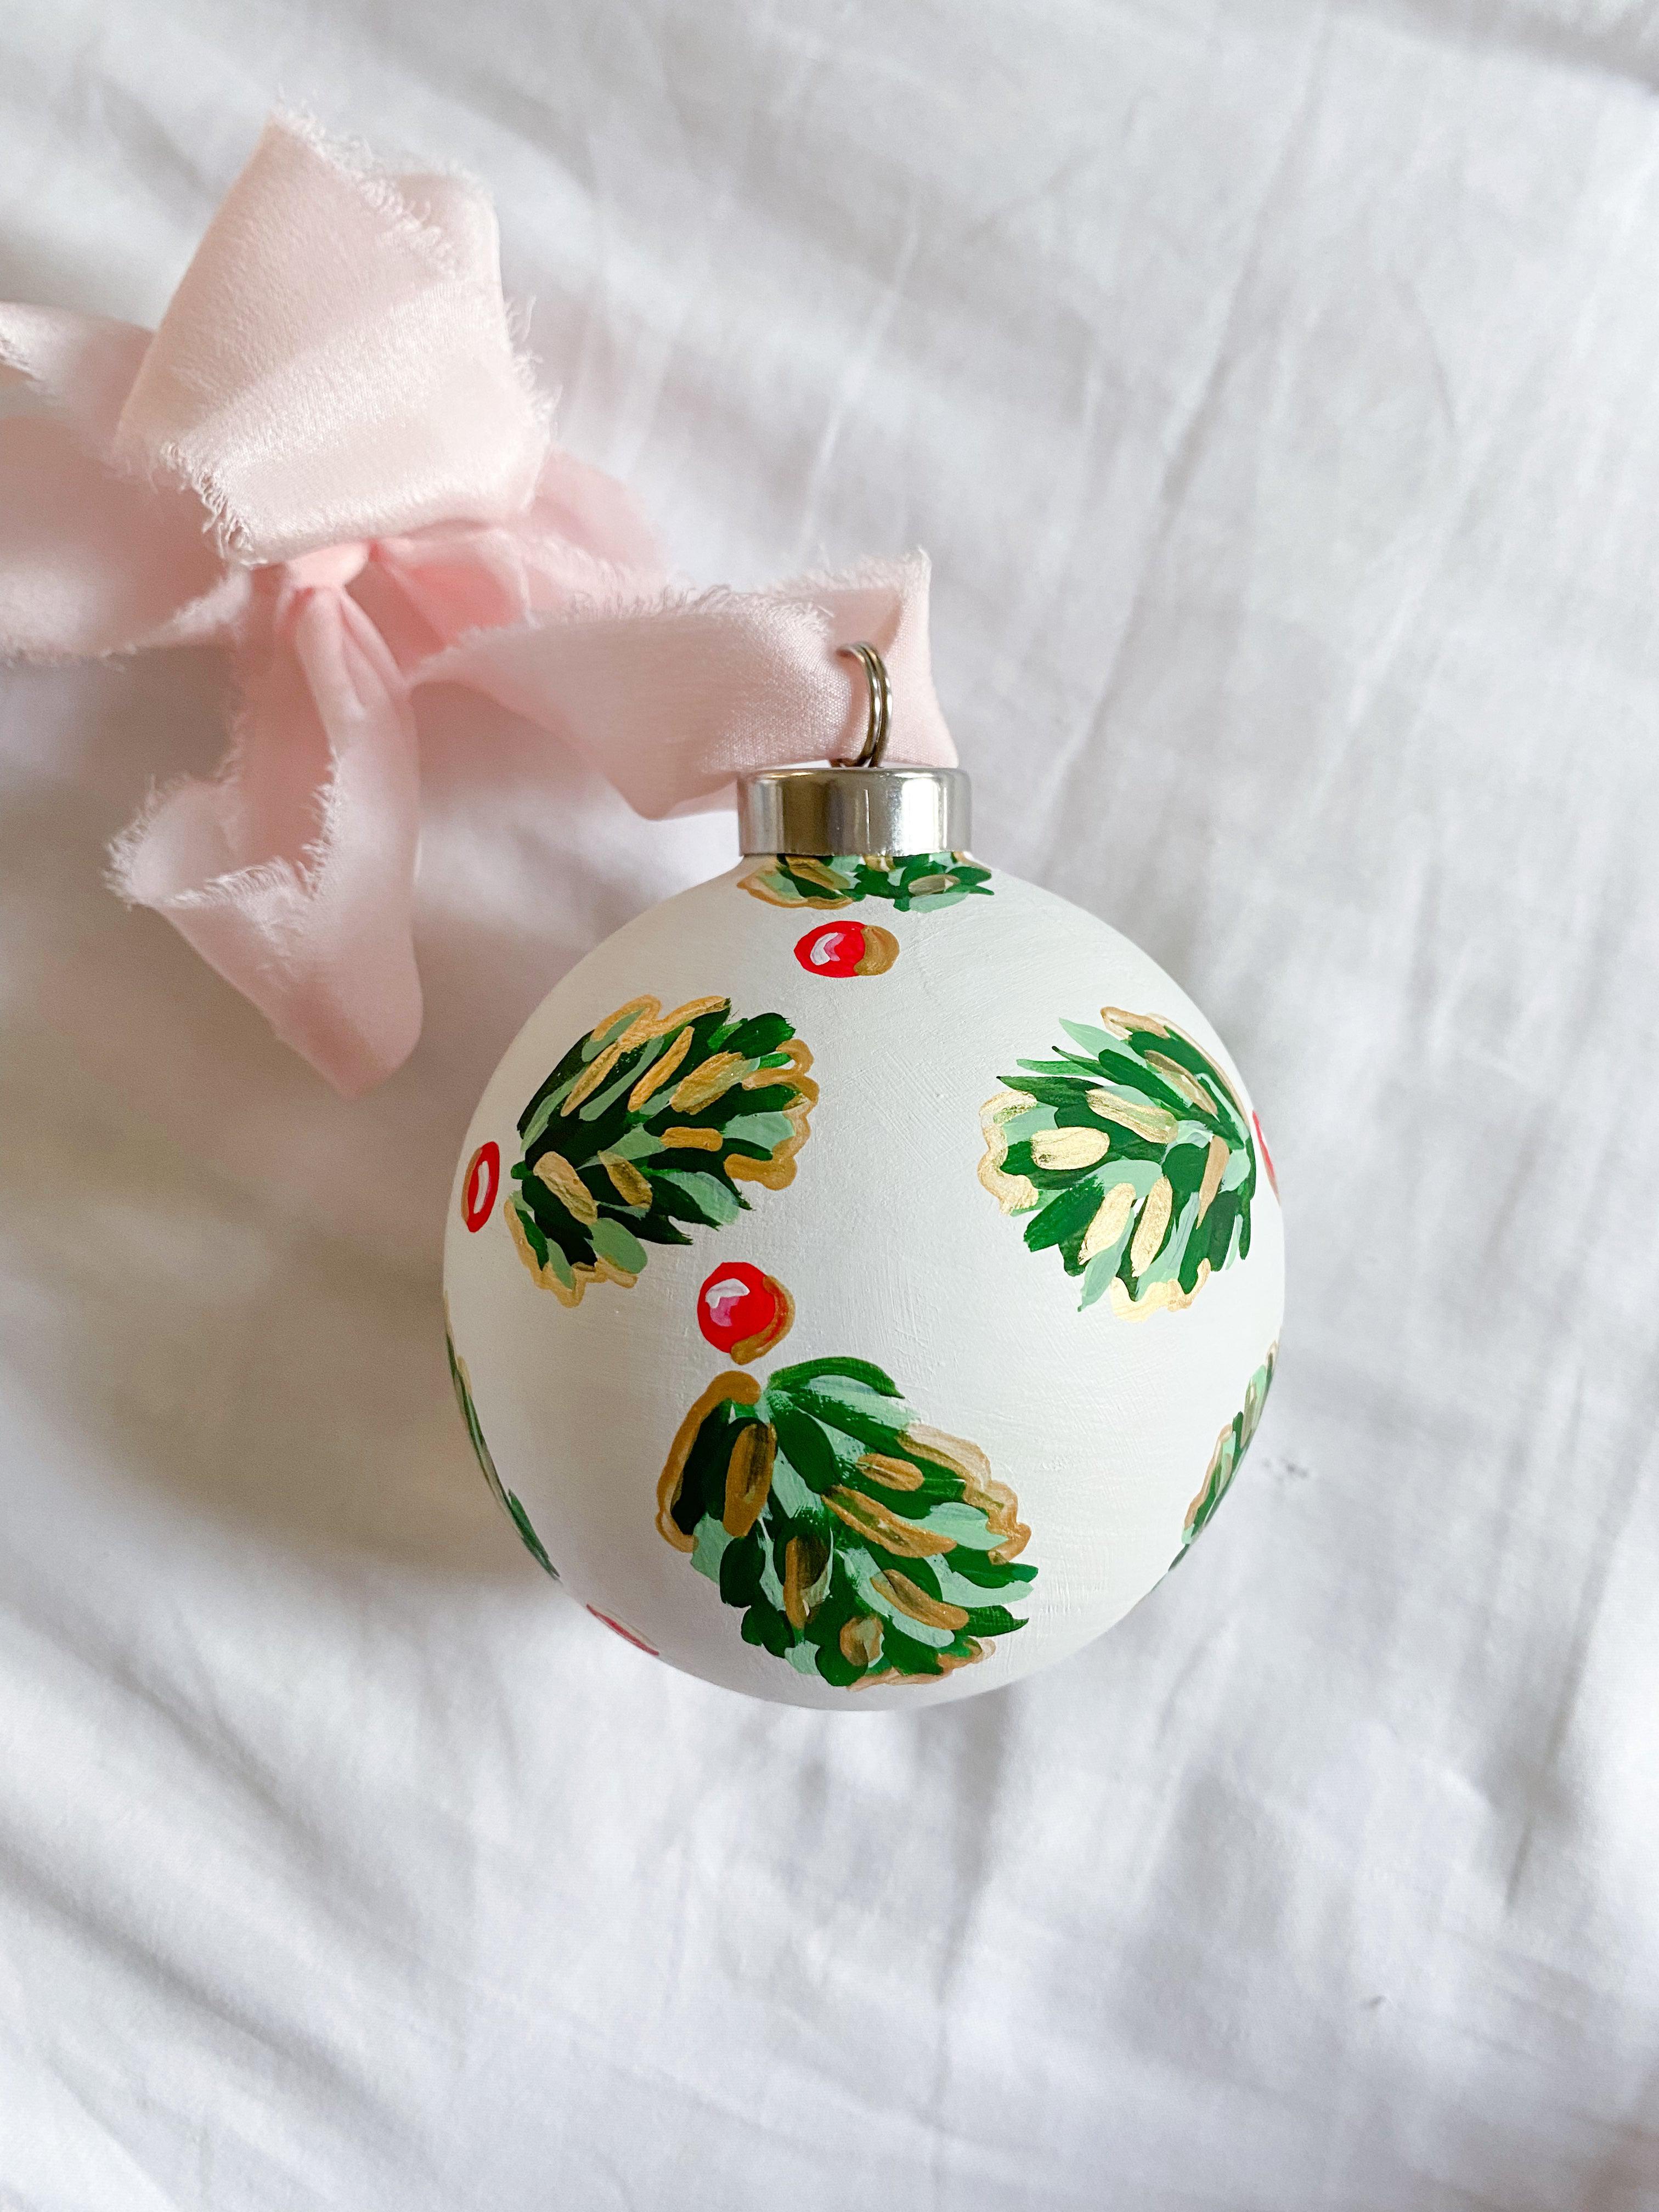 Winter Pearl Golden Holly Bauble-Ceramic Hand-Painted Keepsake Ornament | Measuring 3" x 3" | Features the Golden Holly design with an ivory base and shimmery gold accents | Coated with a protective matte finish that will keep it protected and shimmering year after year | Your color choice of silk crepe ribbon with a frayed edge for hanging | Each bauble is slightly different with potential small imperfections due to the hand-painted nature, making each one special and unique!-The Singing Little Bird